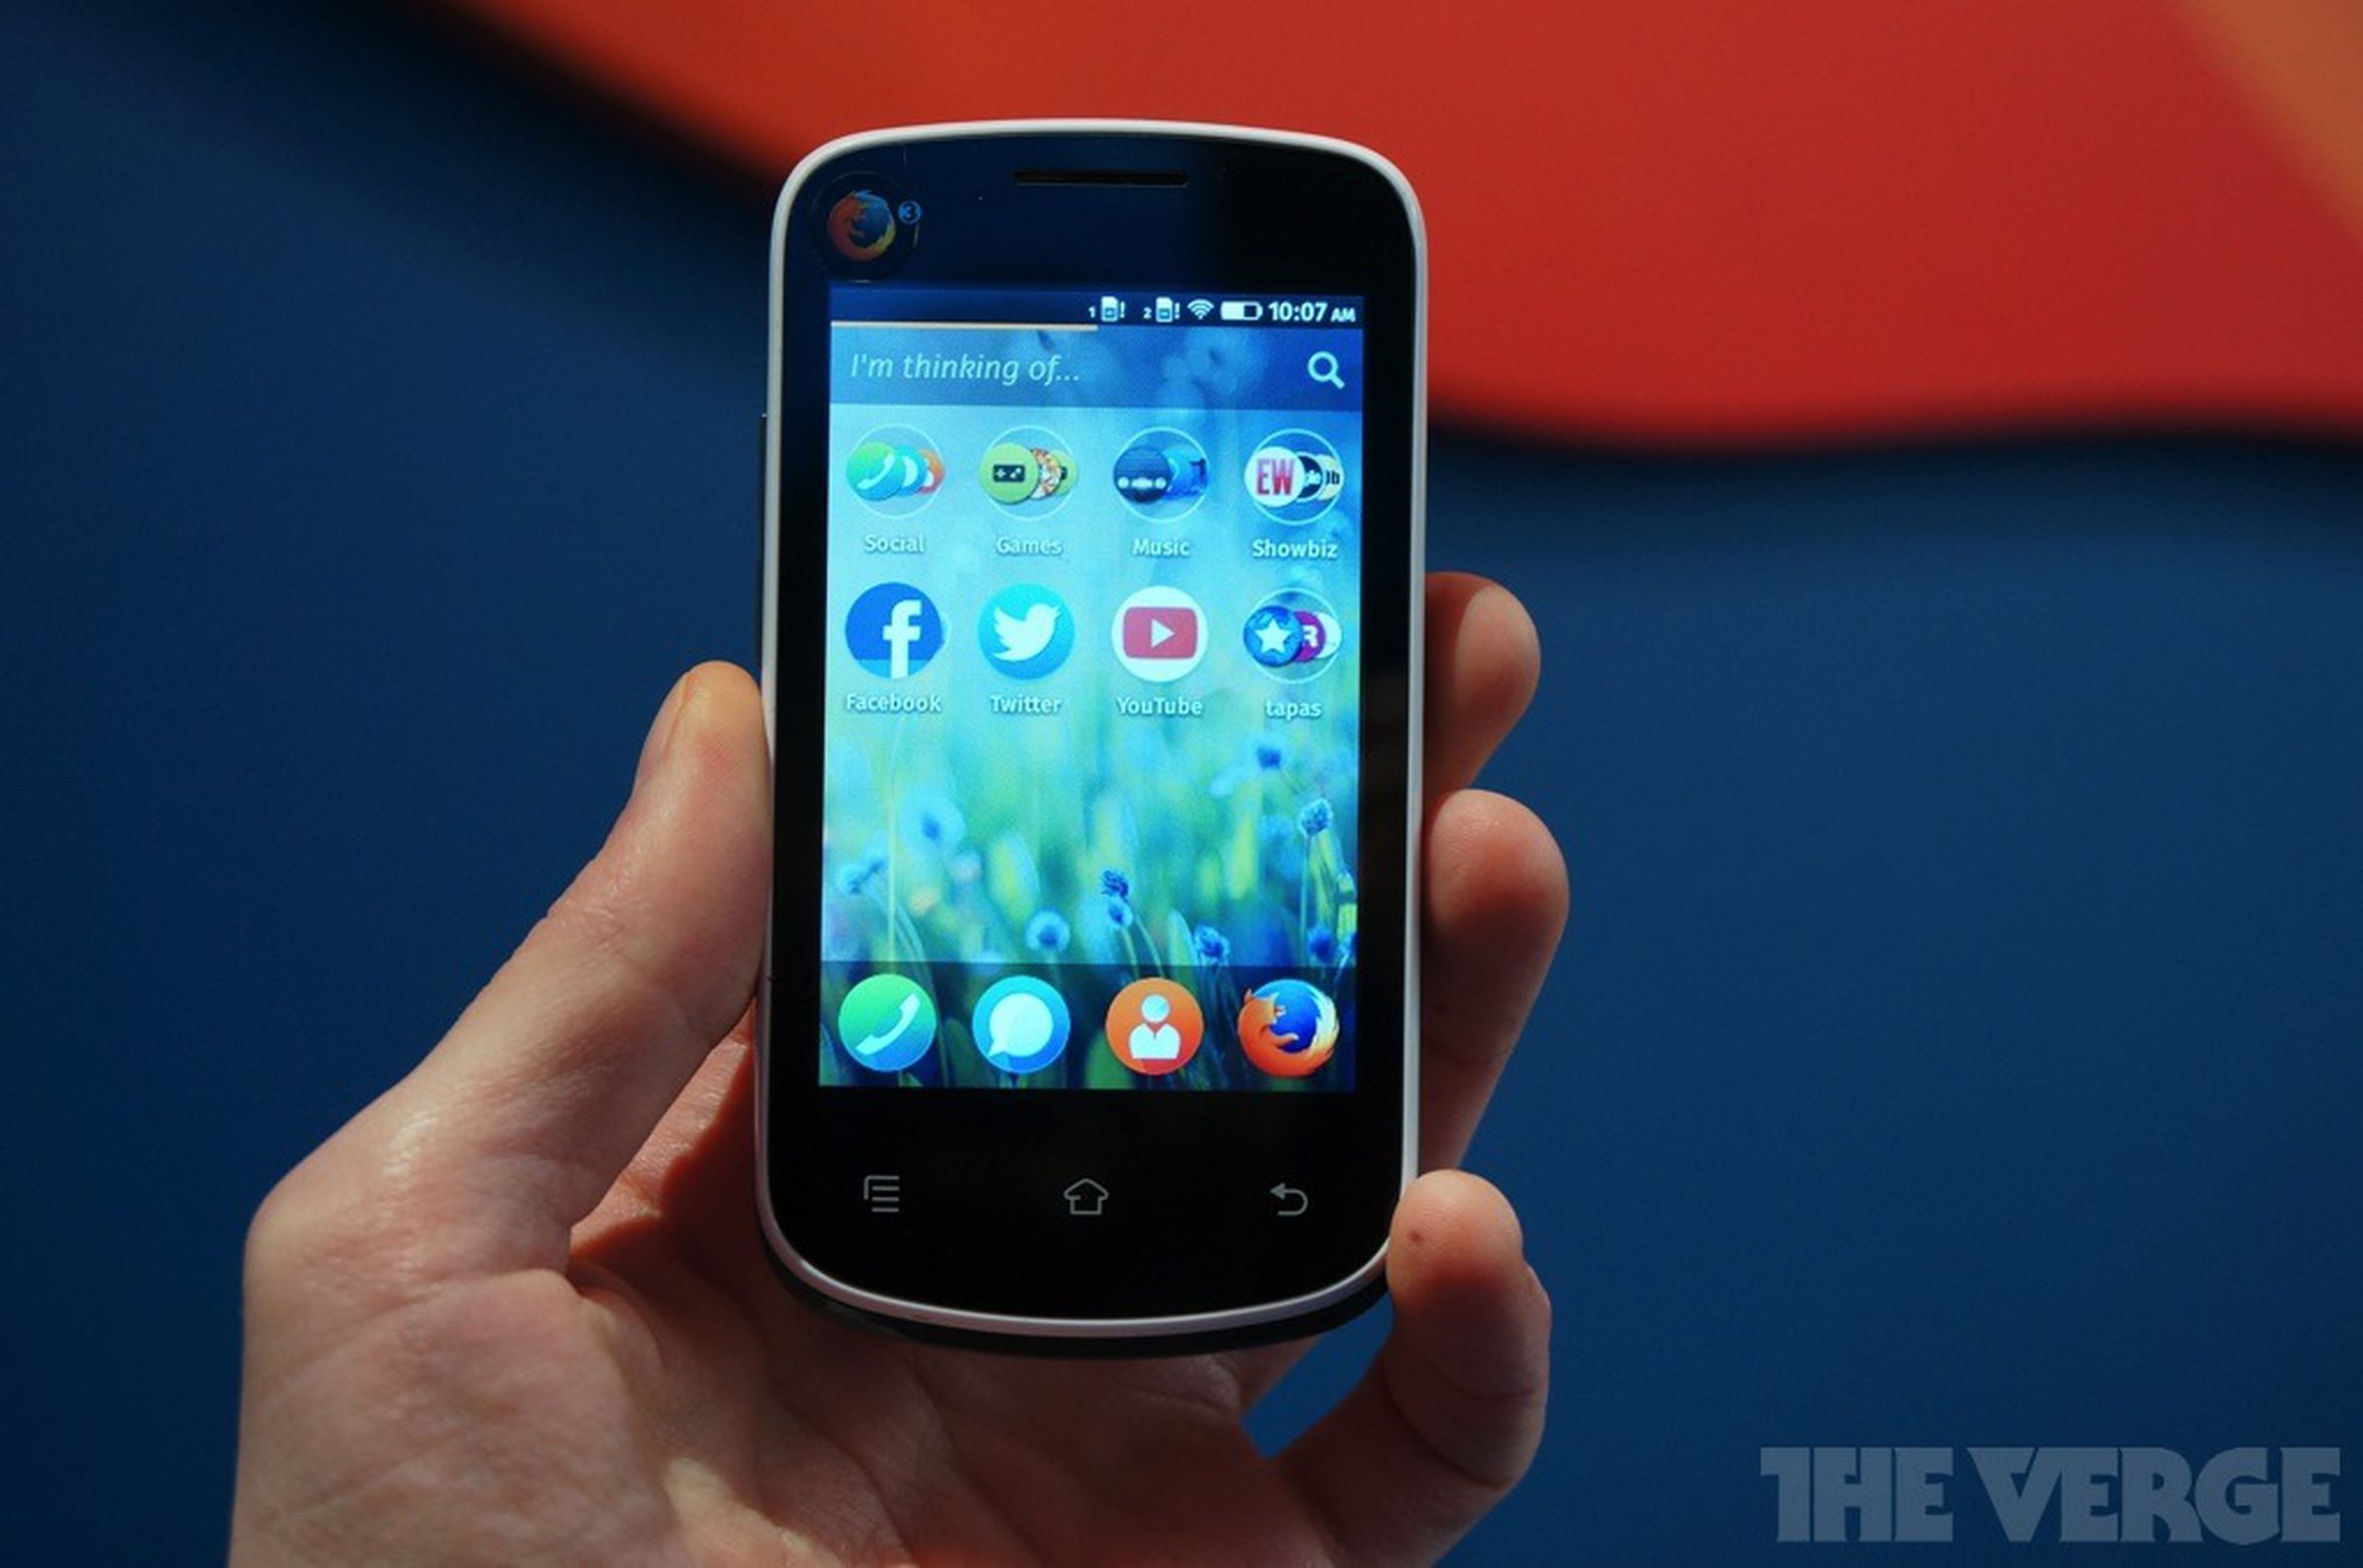 The $25 Firefox OS smartphone